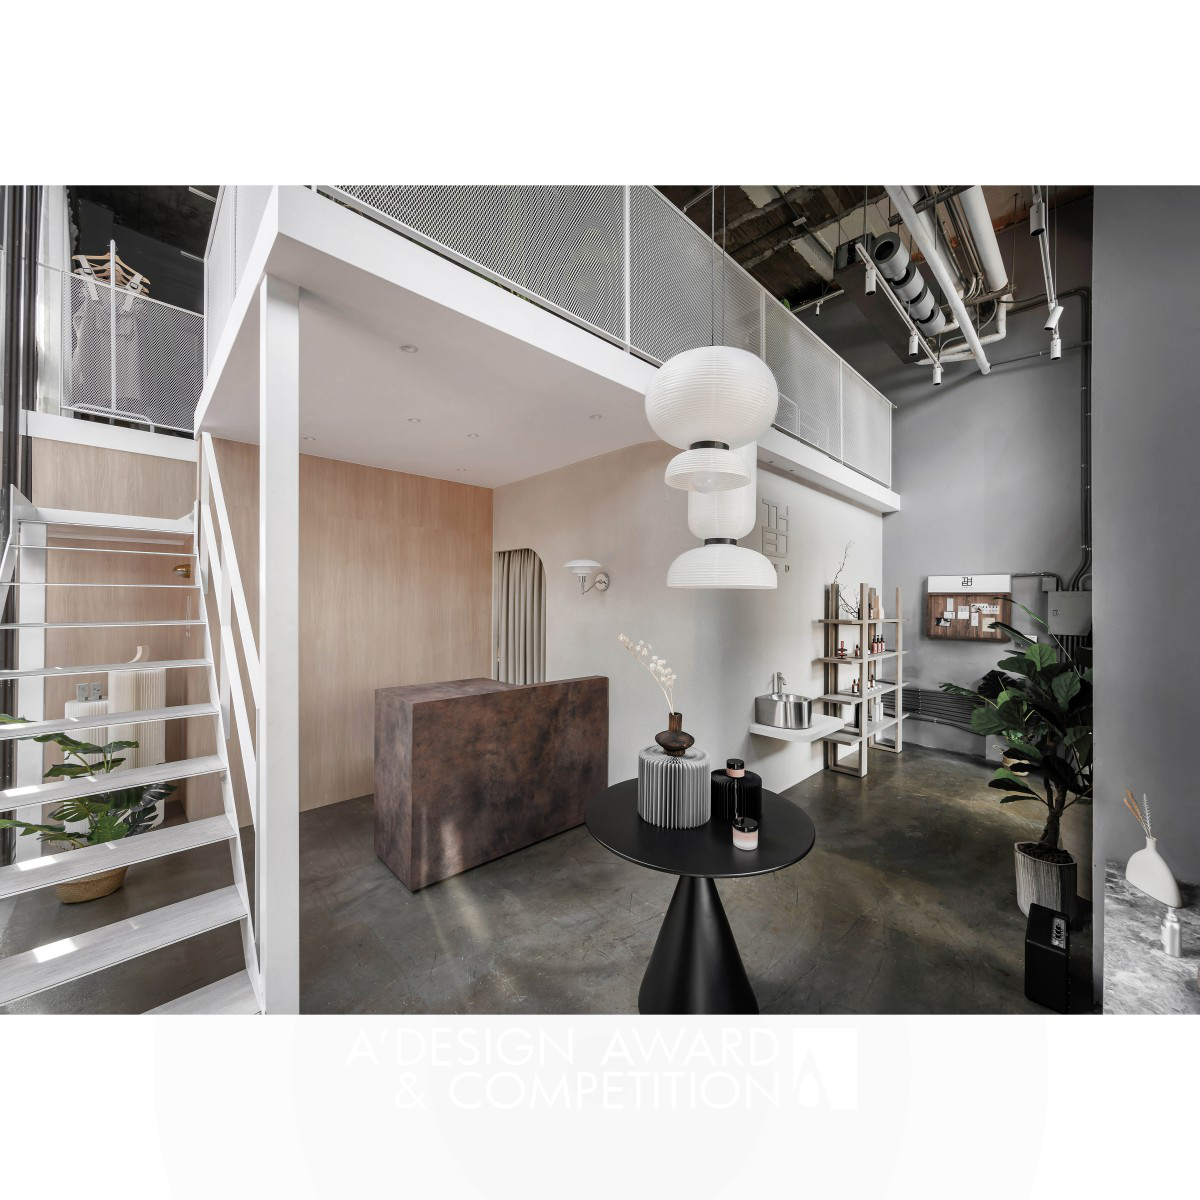 The D Showroom Commercial Space by Tzu Chien Chiang